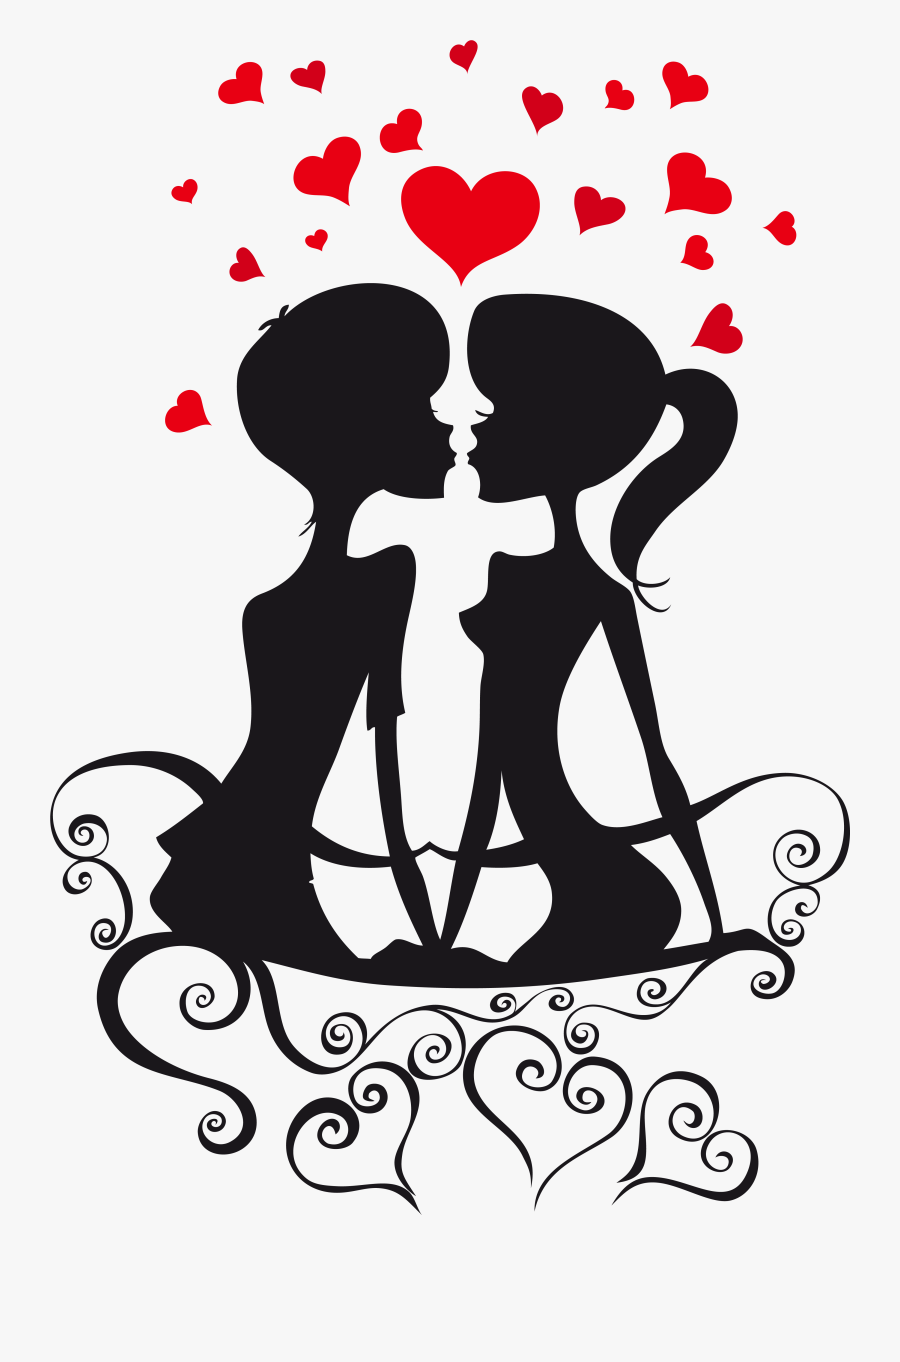 Love Couple Silhouettes On - Couples Vector, Transparent Clipart